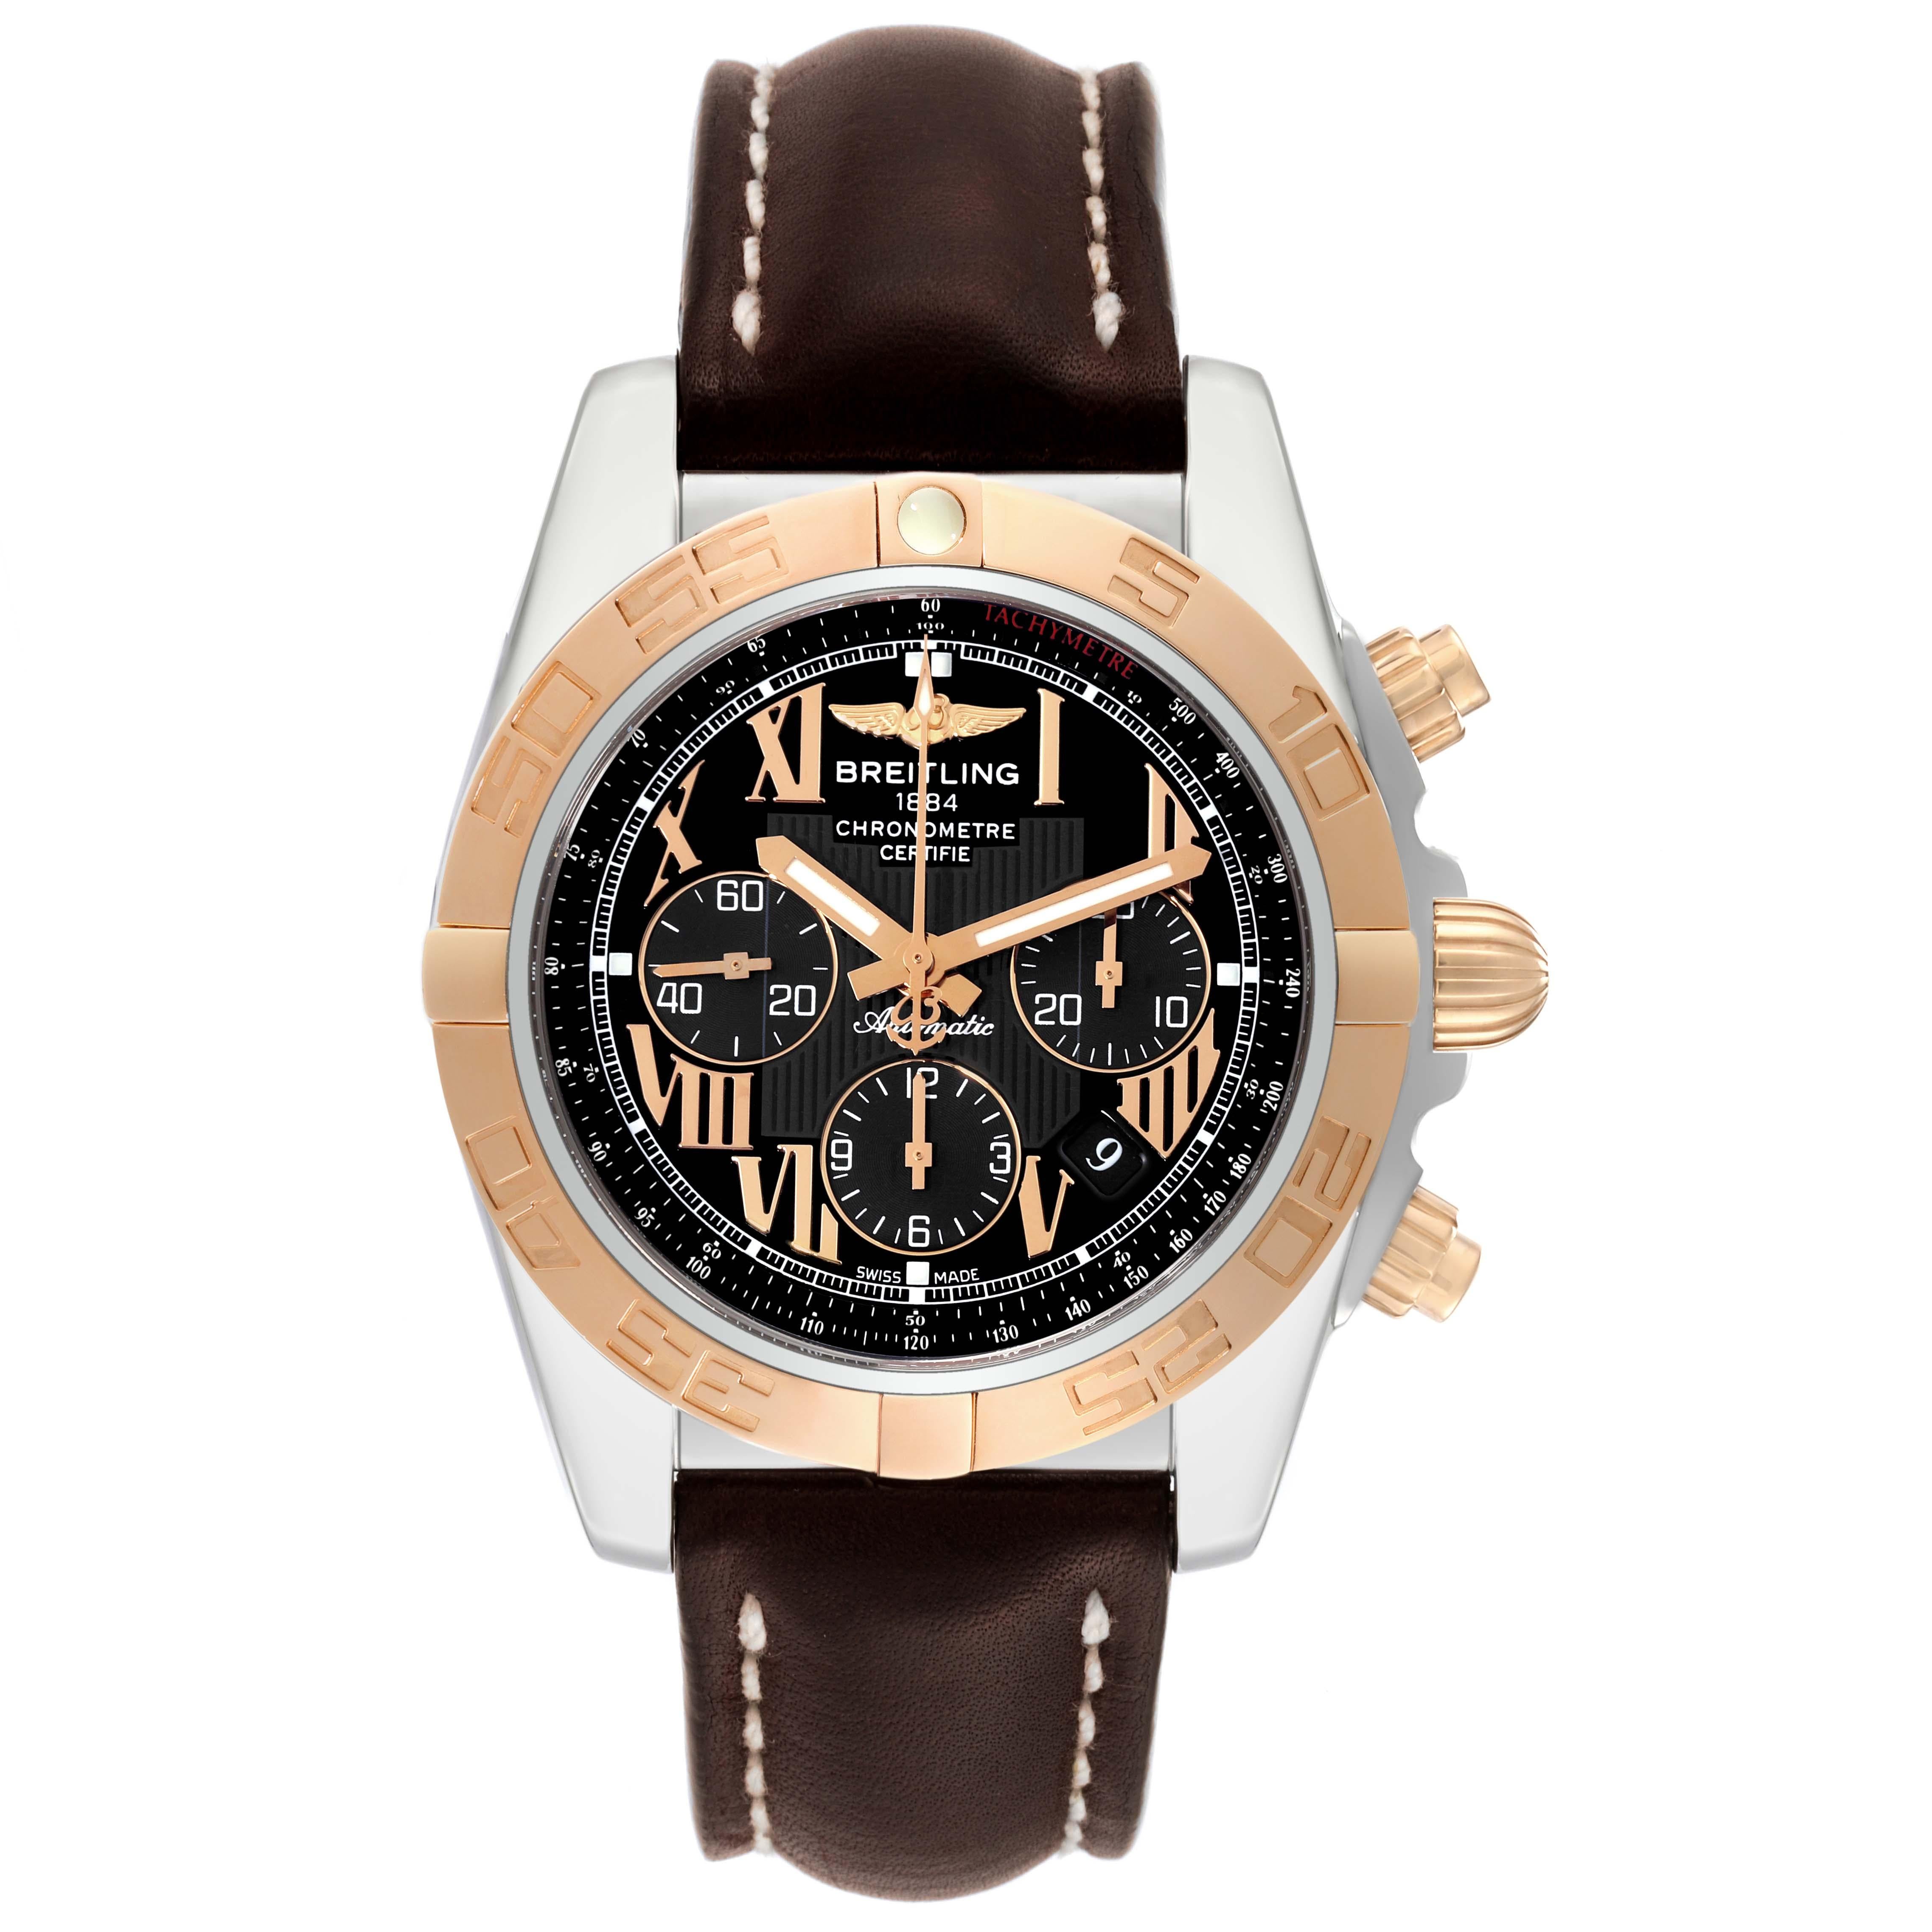 Breitling Chronomat Evolution Black Dial Steel Rose Gold Mens Watch CB0110. Automatic self-winding officially certified chronometer movement. Chronograph function. Stainless steel and 18K rose gold case 45 mm in diameter. 18k rose gold screwed-down